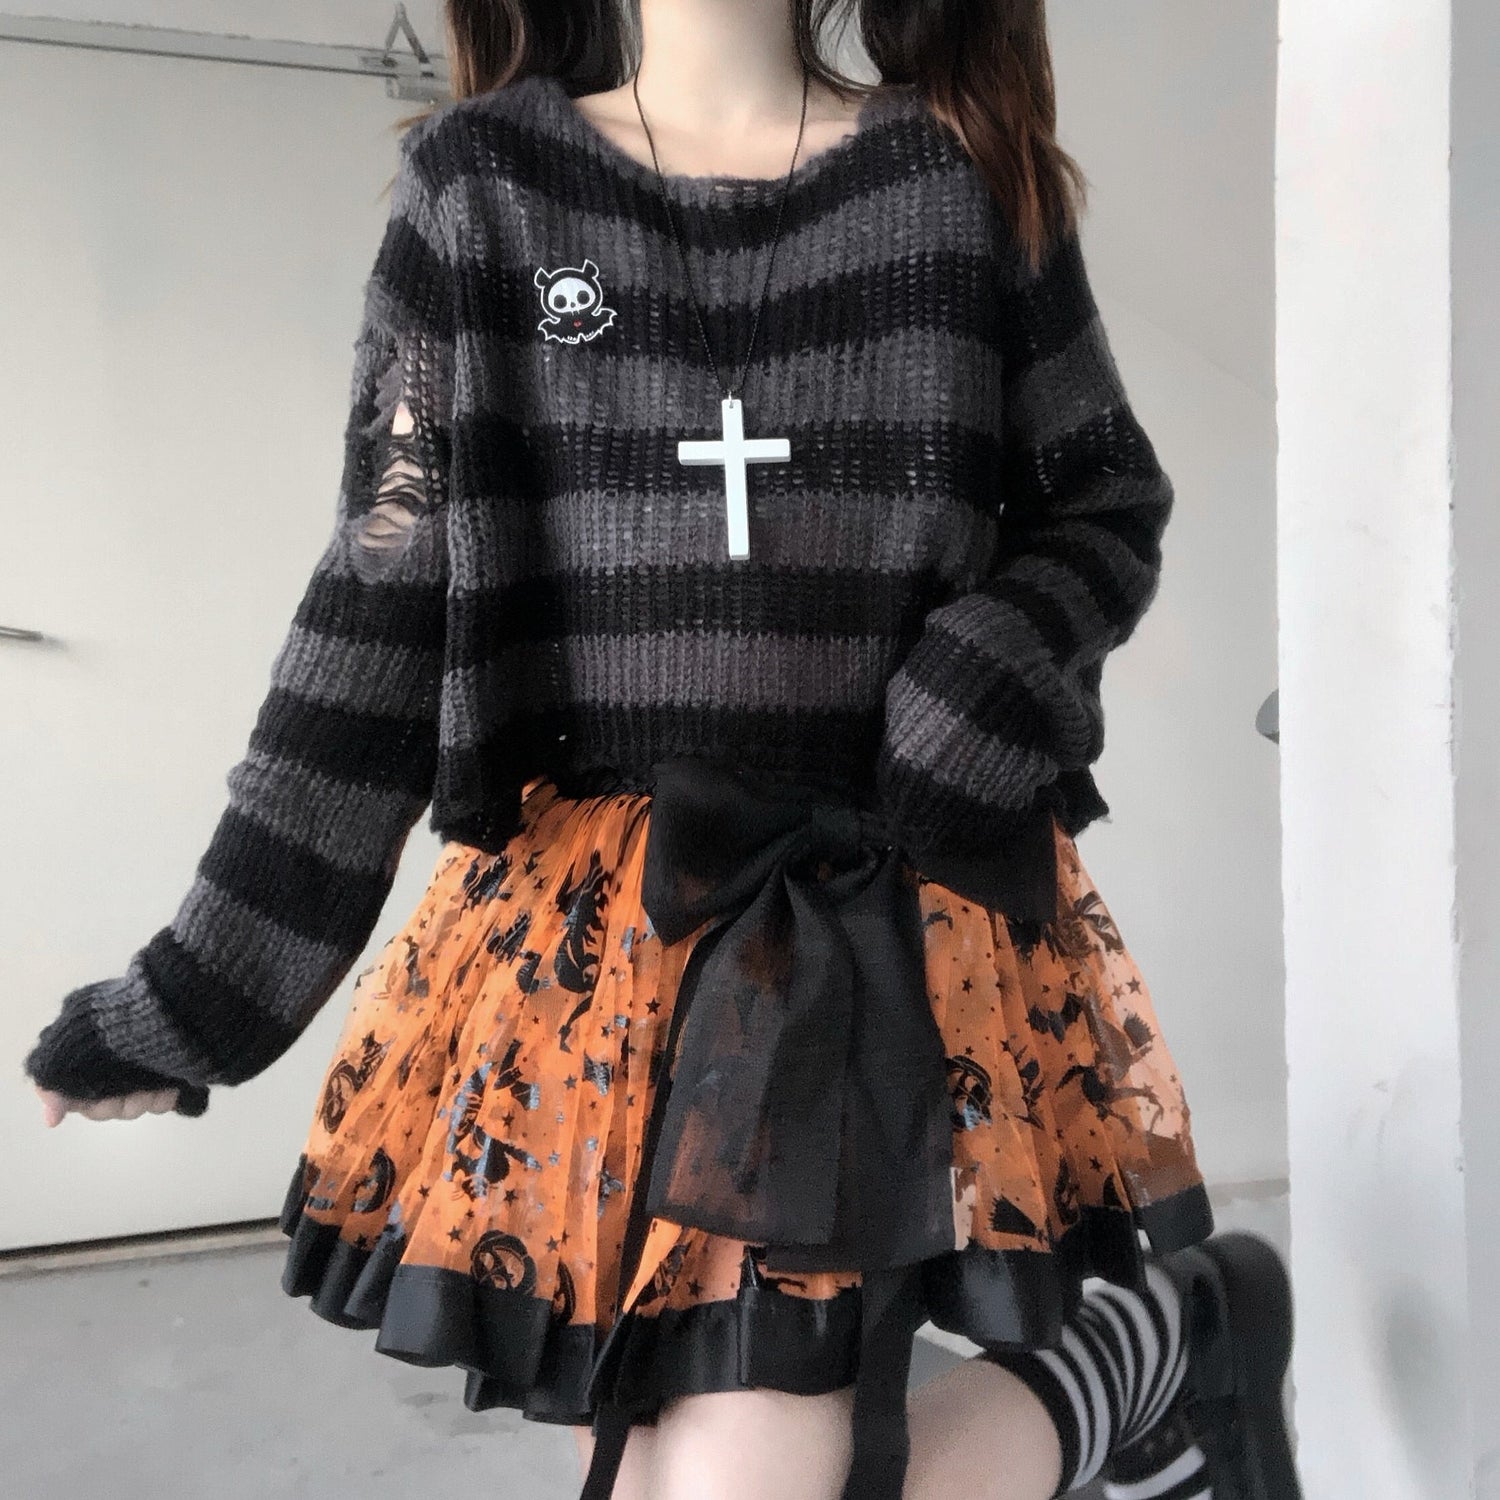 Pastel Goth Striped Sweater - Sweaters